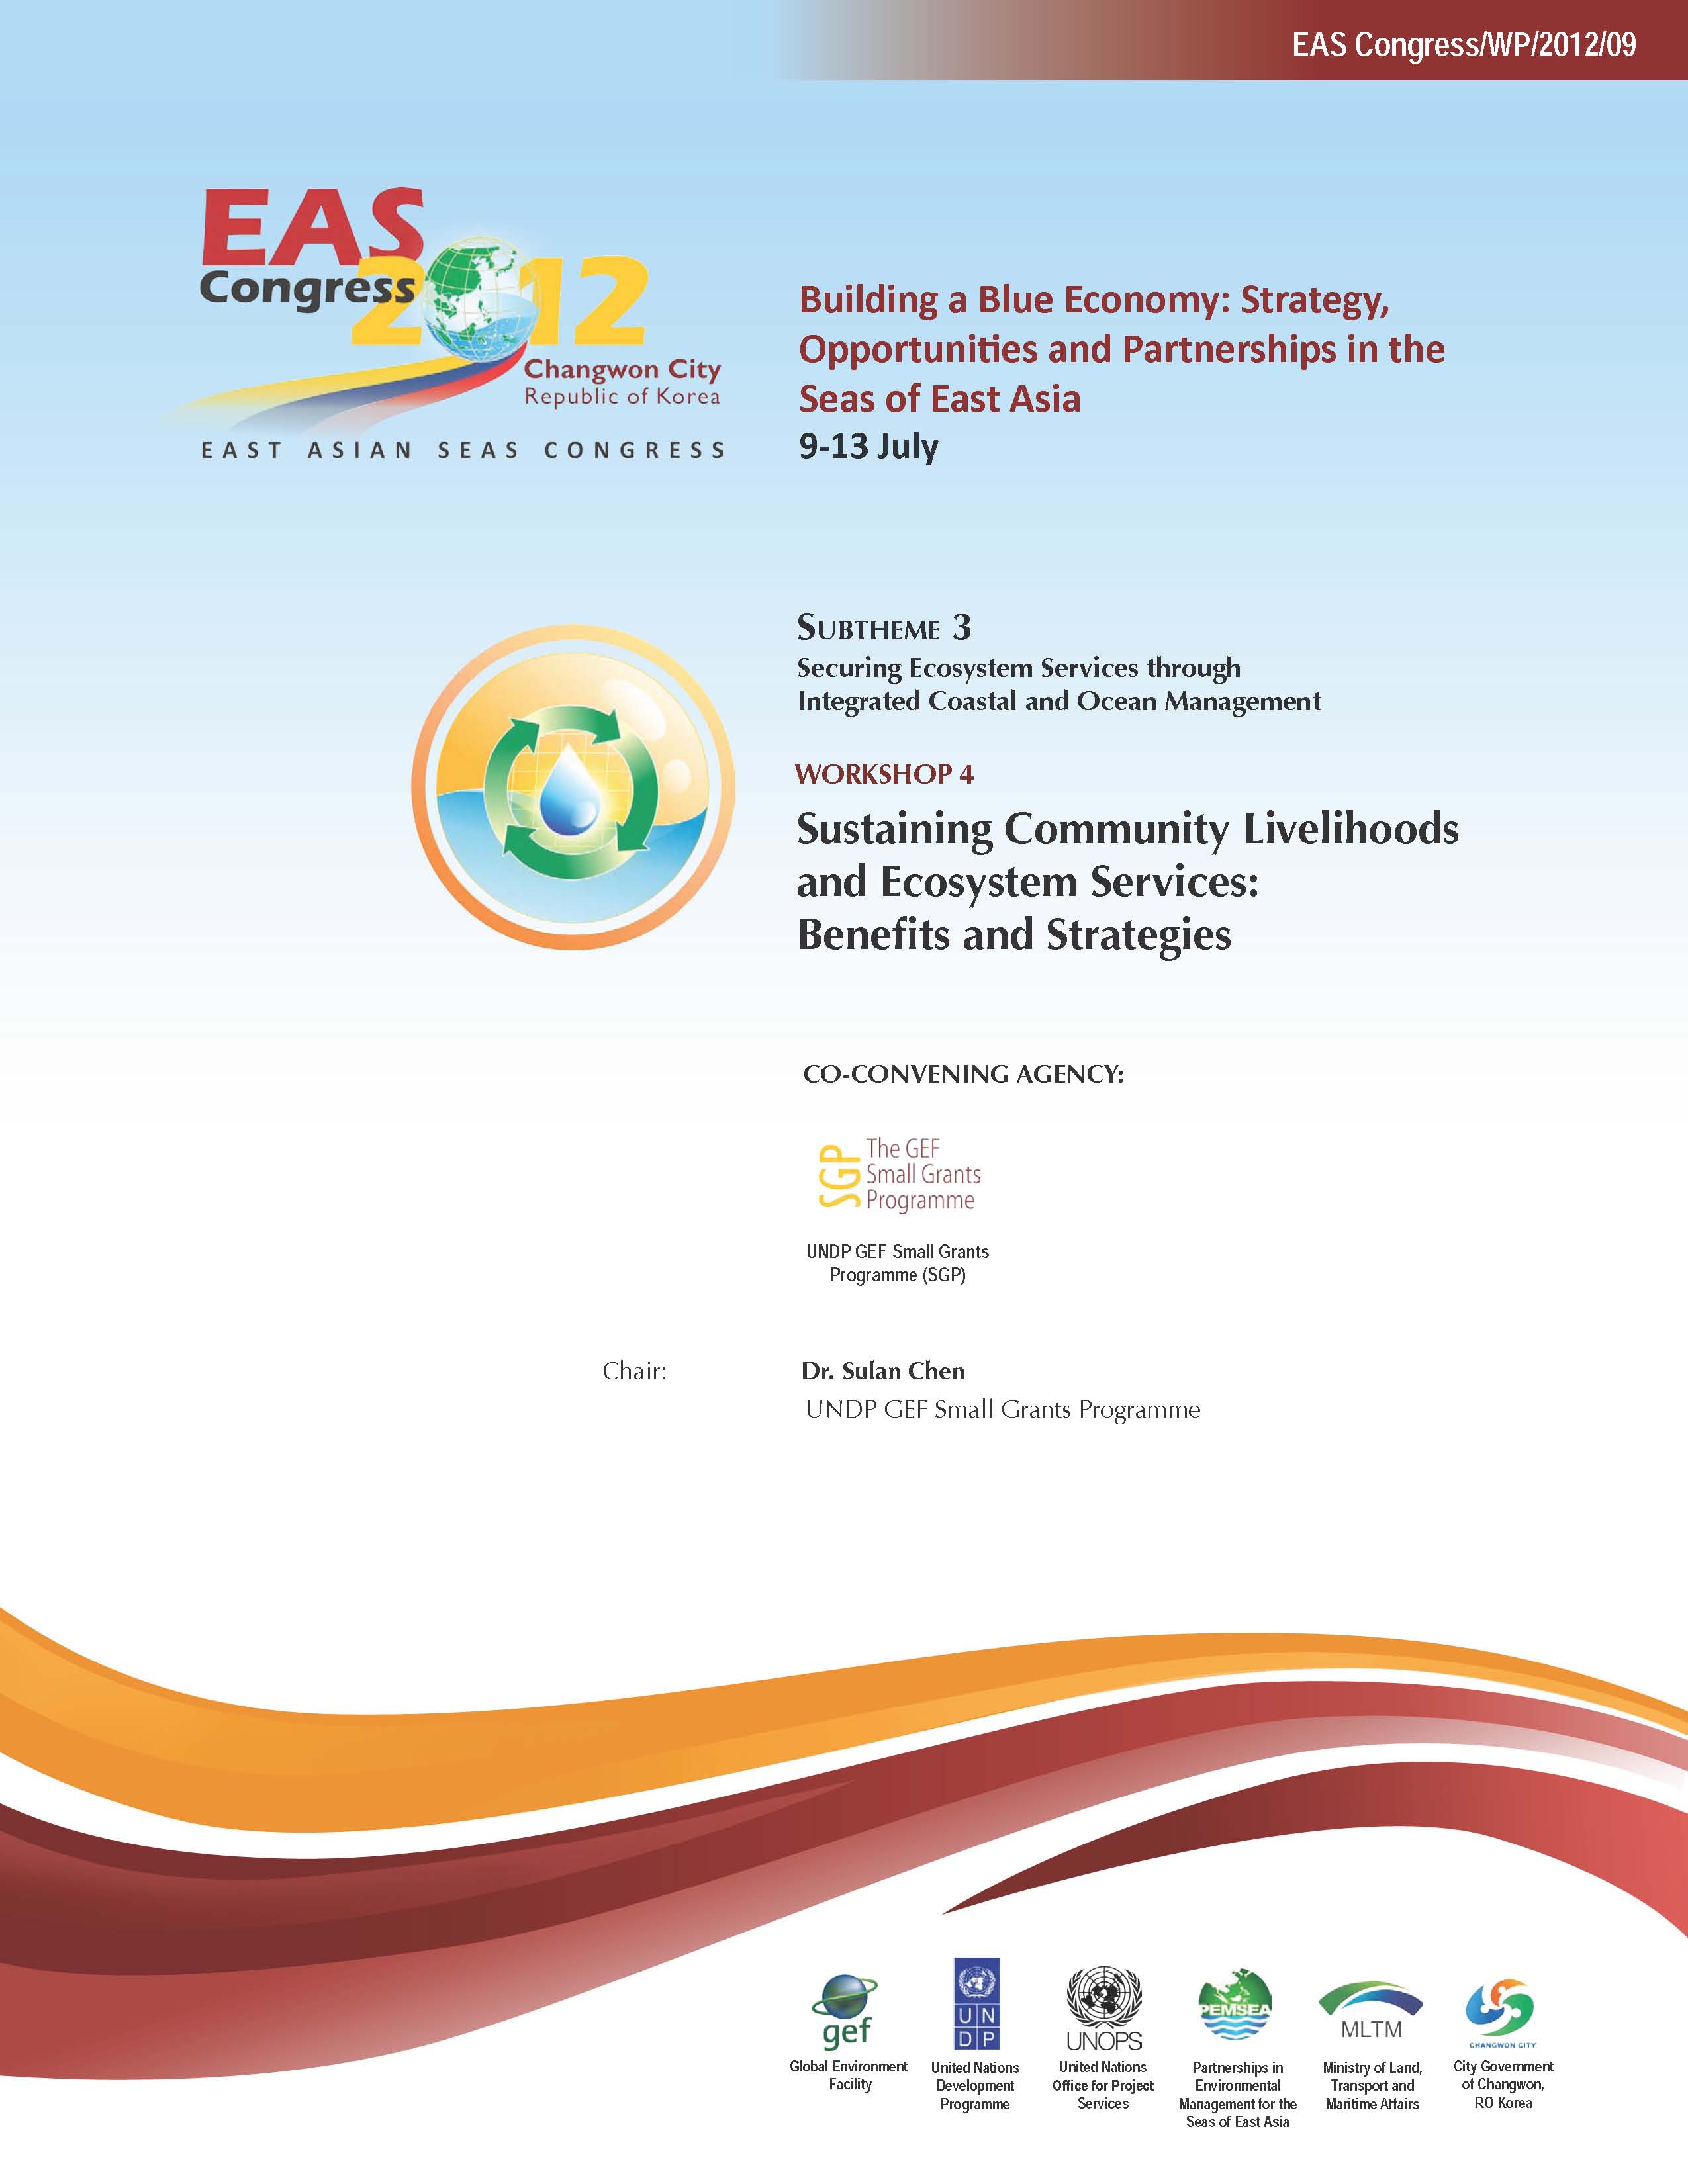 Proceedings of the Workshop on Sustaining Community Livelihoods and Ecosystem Services Benefits and Strategies